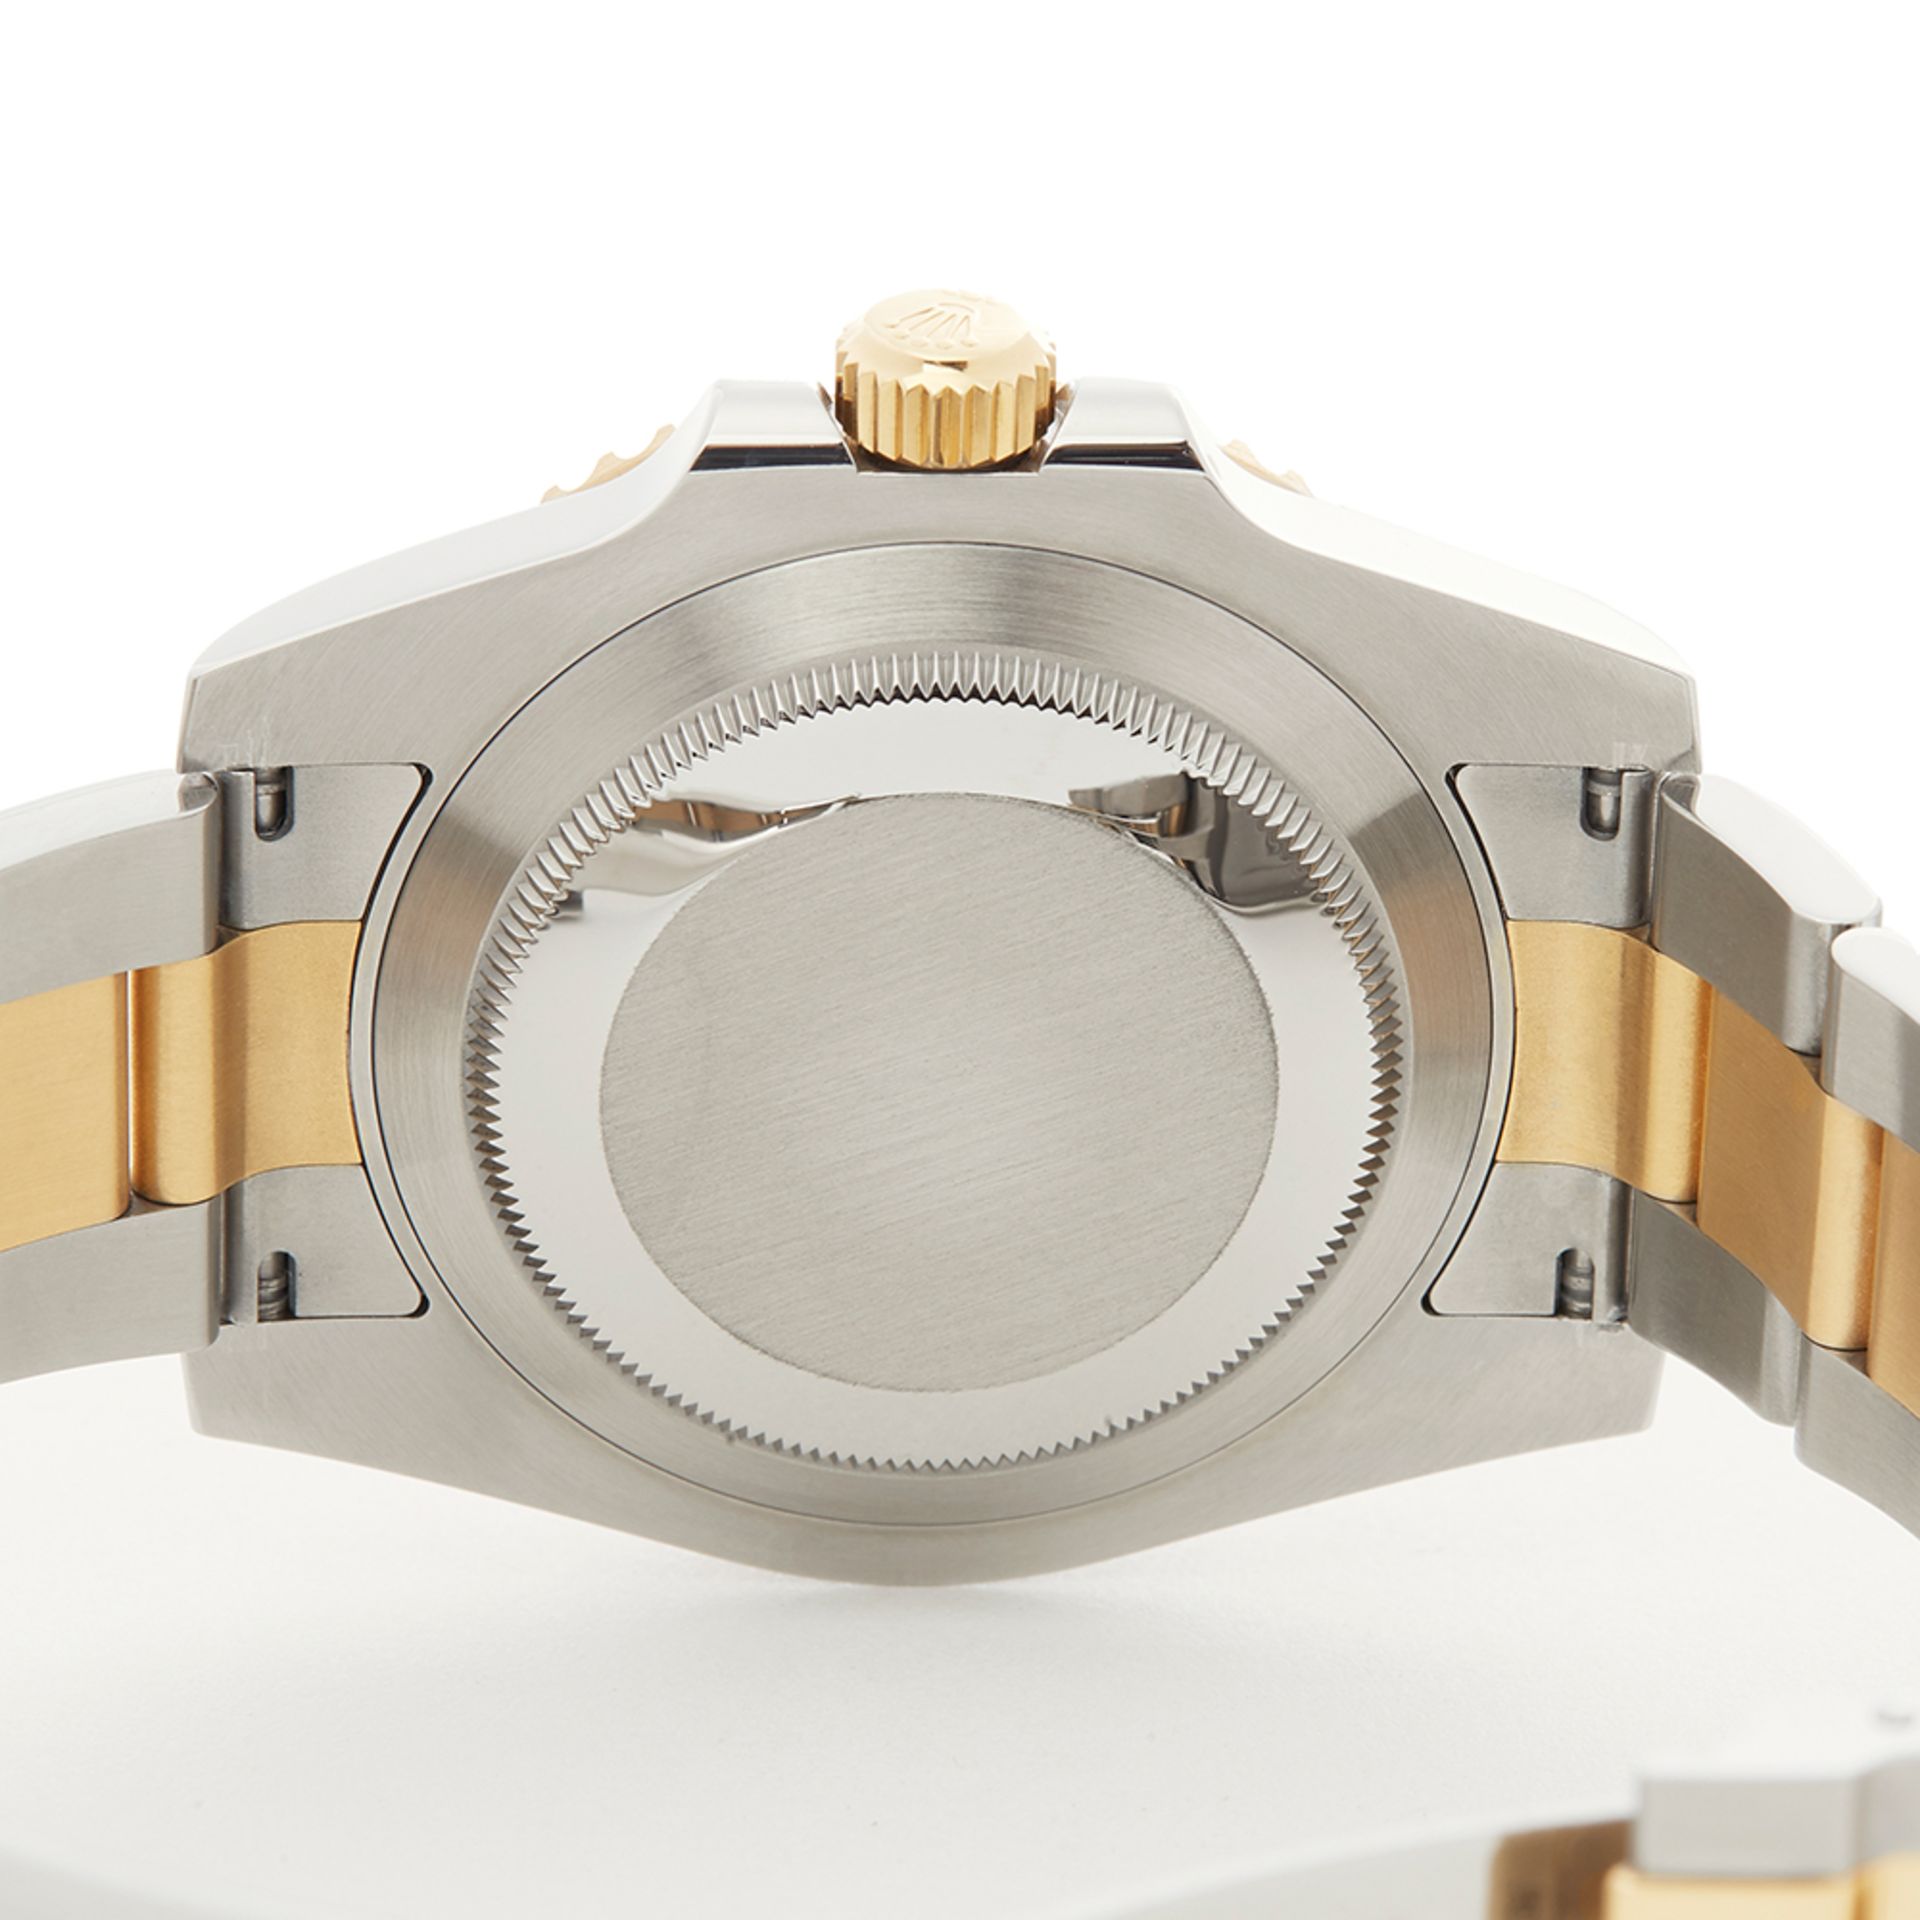 Submariner Stainless Steel & 18K Yellow Gold - 116613LB - Image 7 of 8